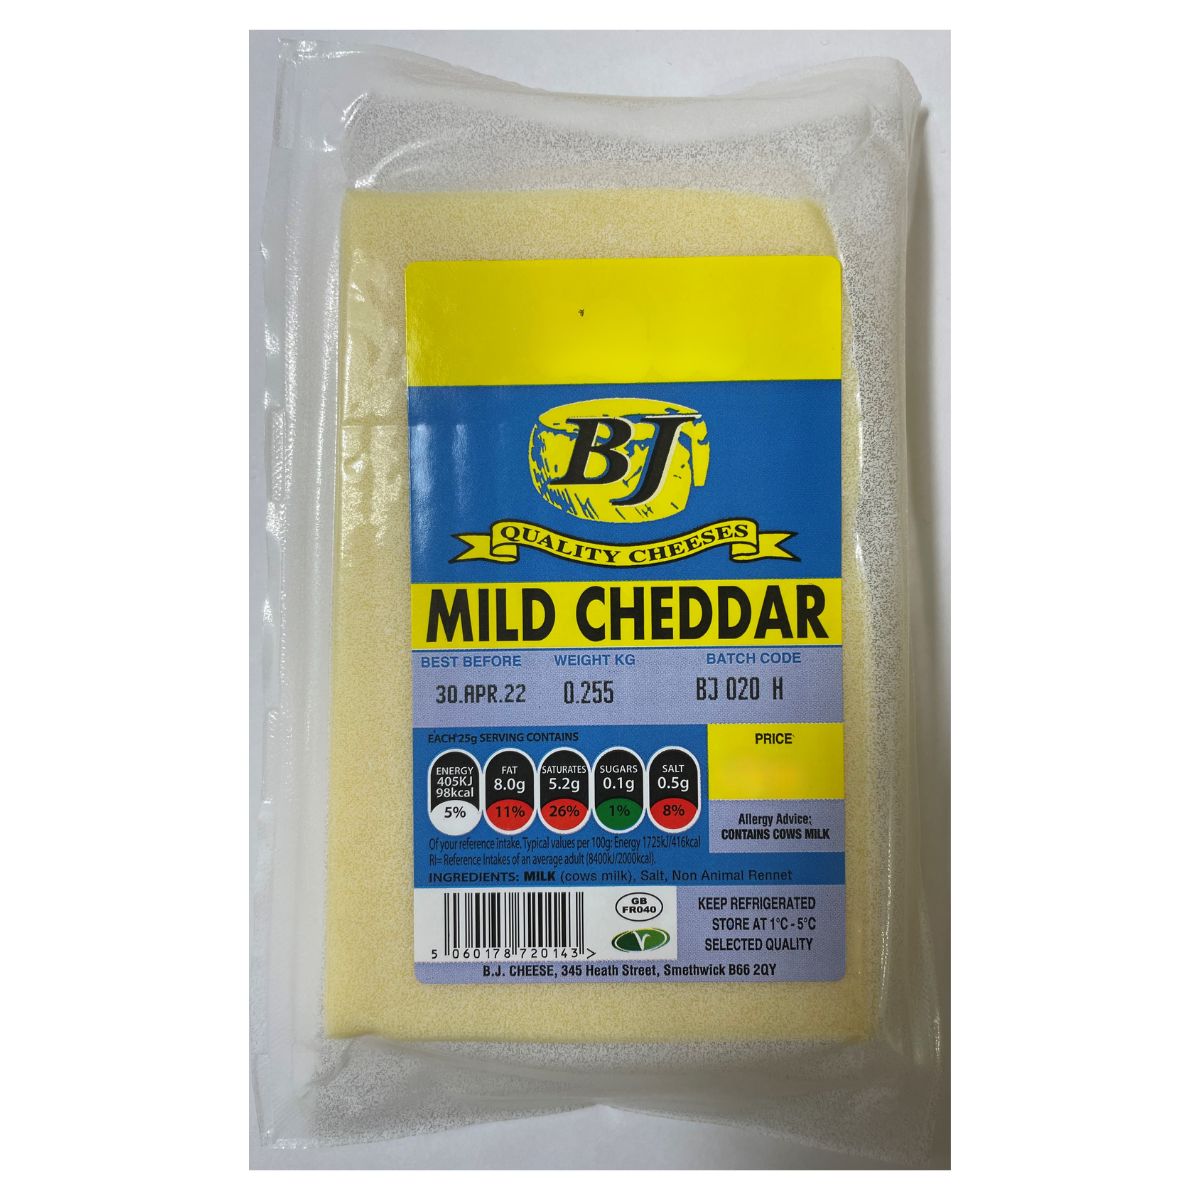 Bj - Mild Cheddar Cheese - 255g in a plastic bag.